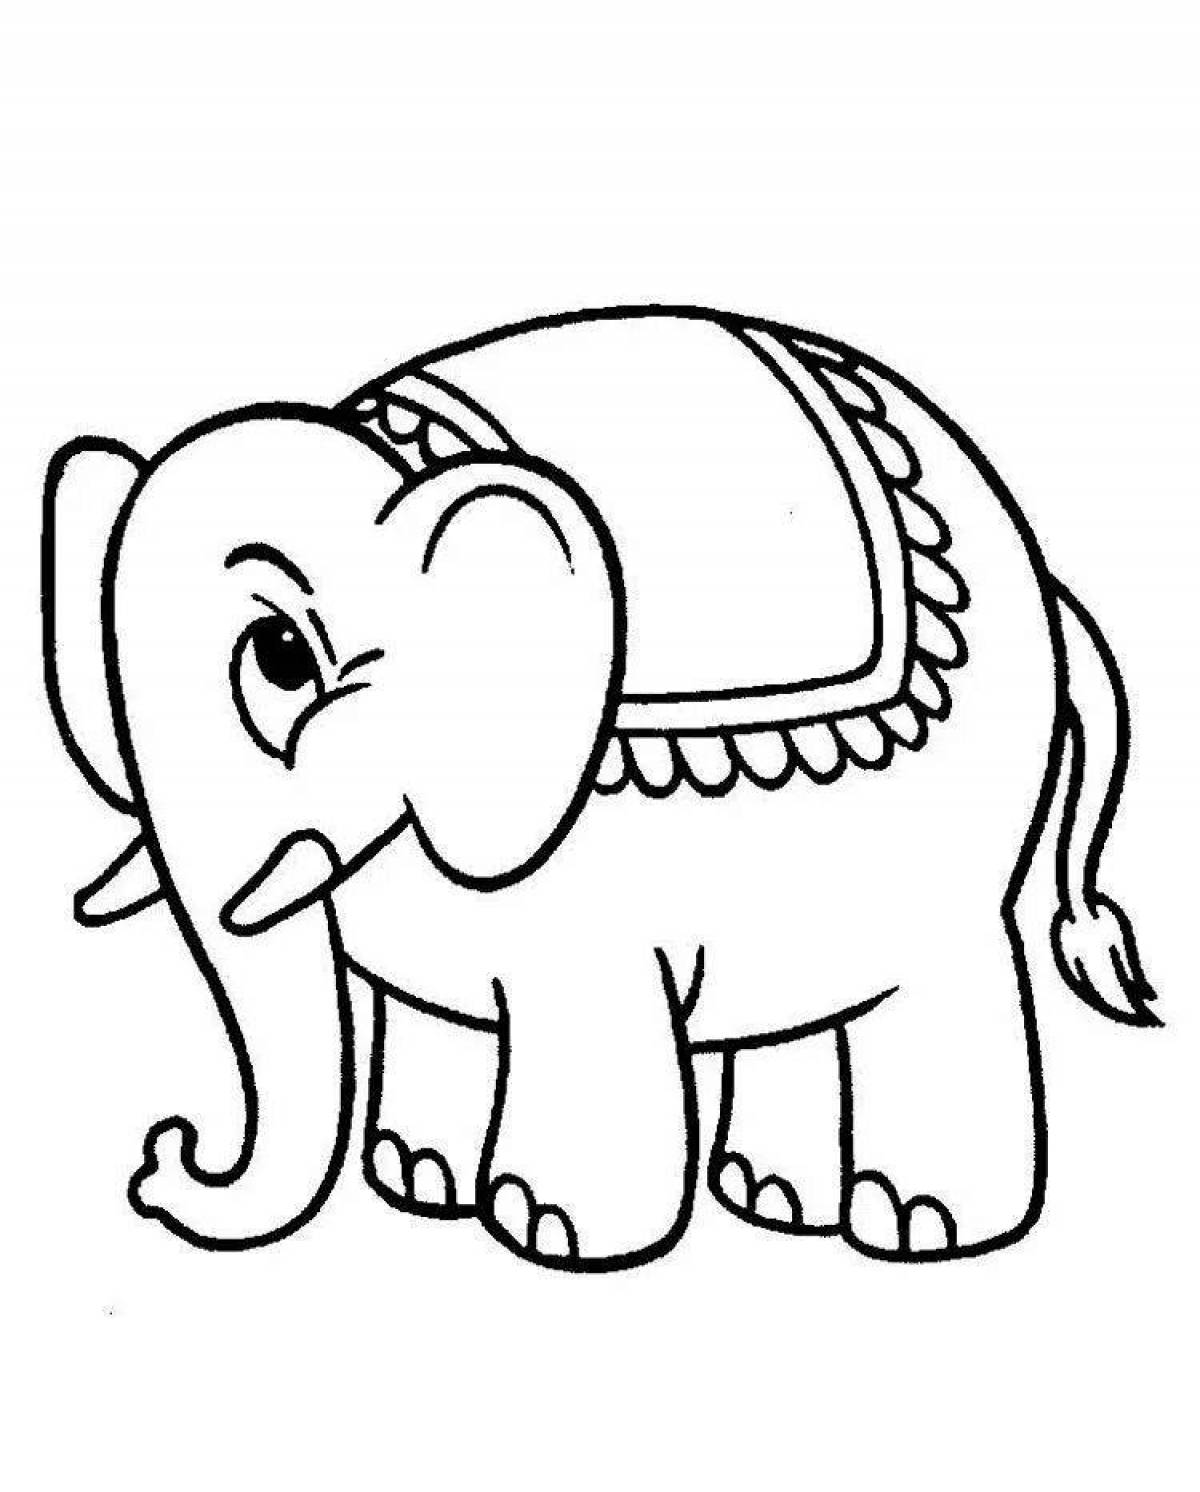 Exciting elephant coloring book for kids